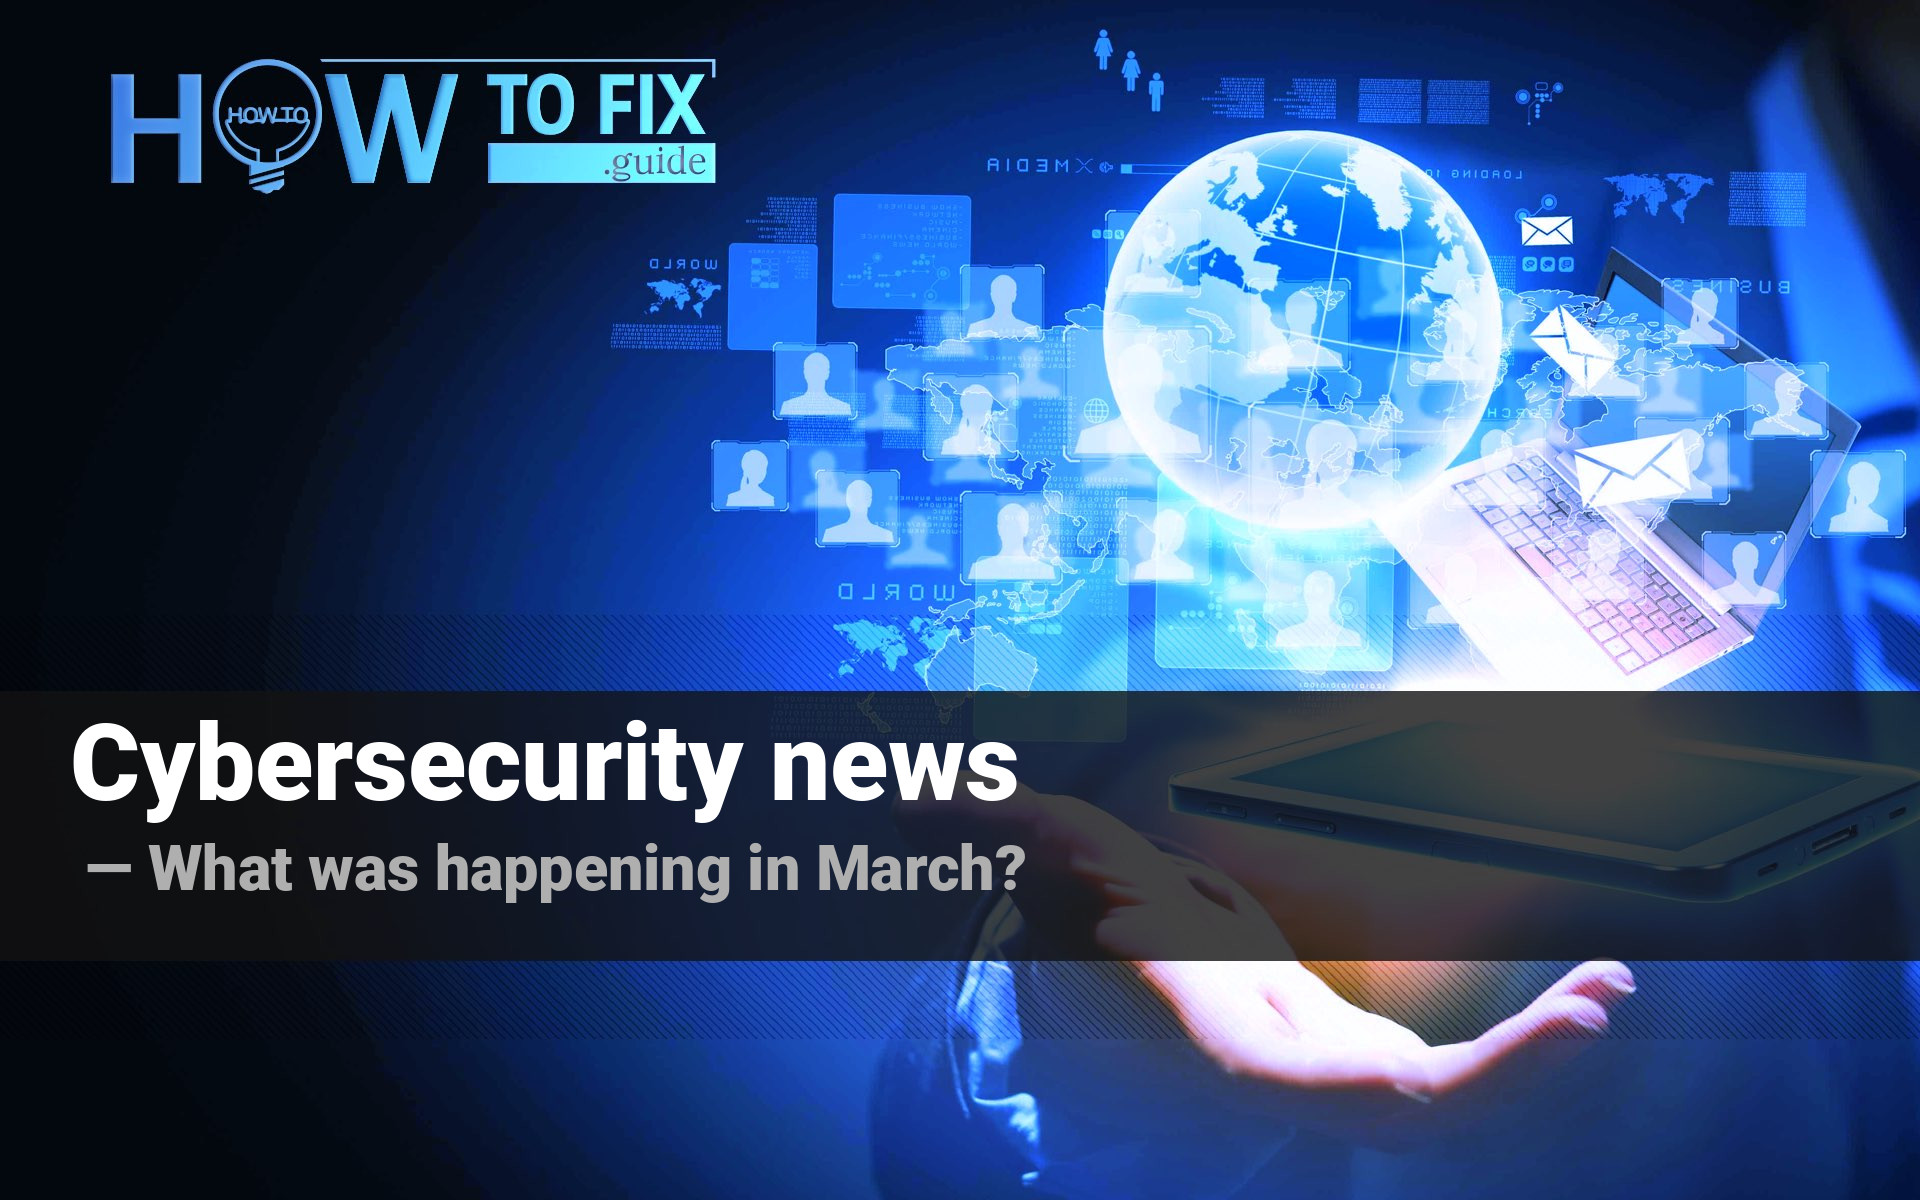 Cybersecurity news: March 2021